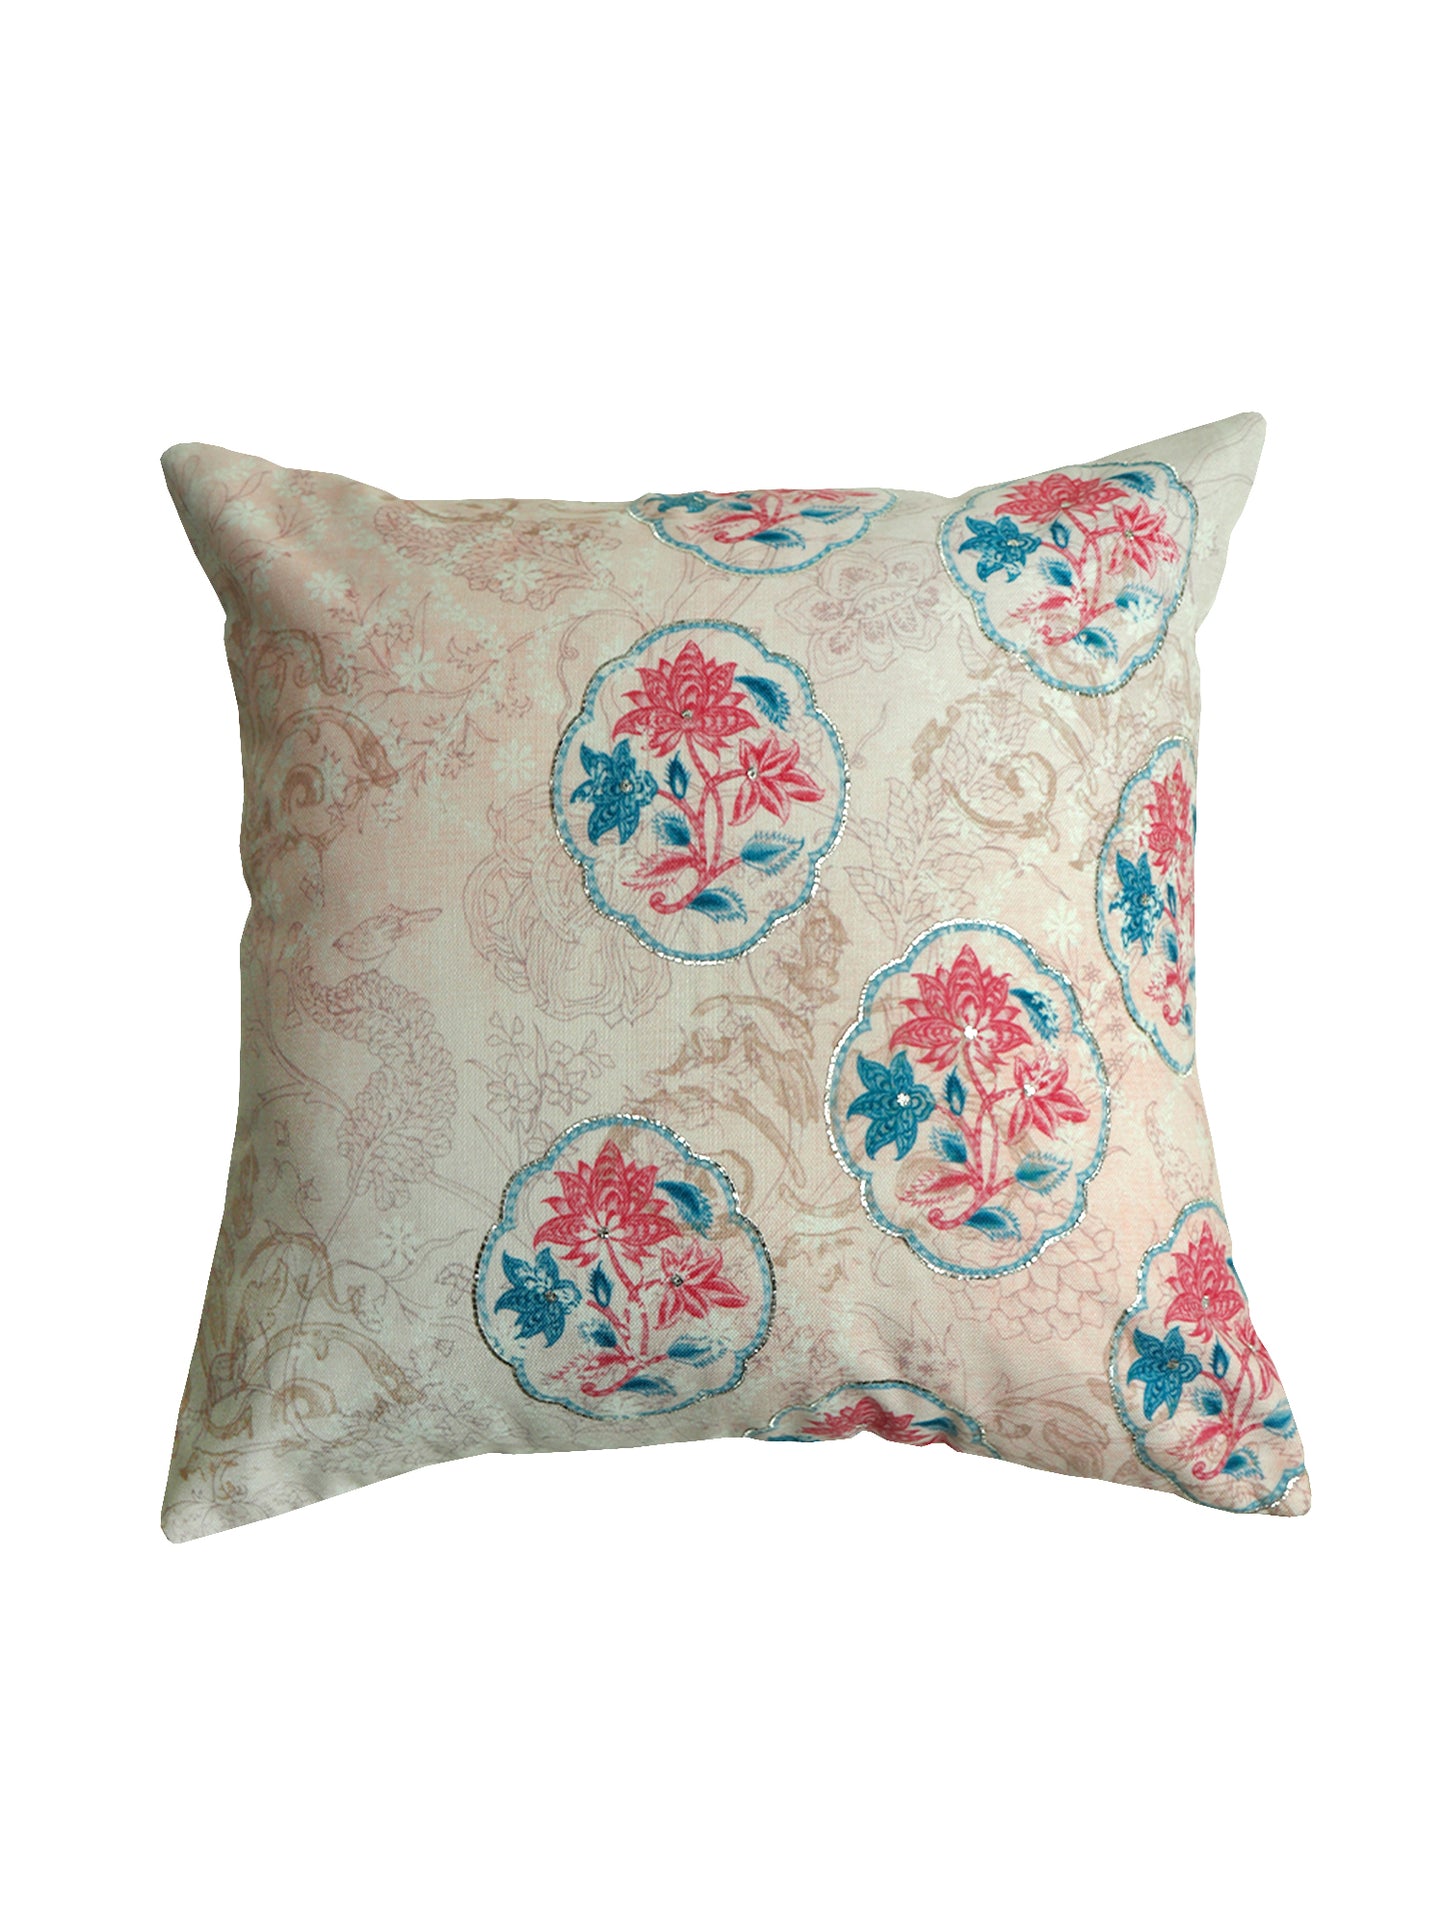 Printed Cushion Cover Polyester with Embroidery Handiwork Floral - 16" X 16"